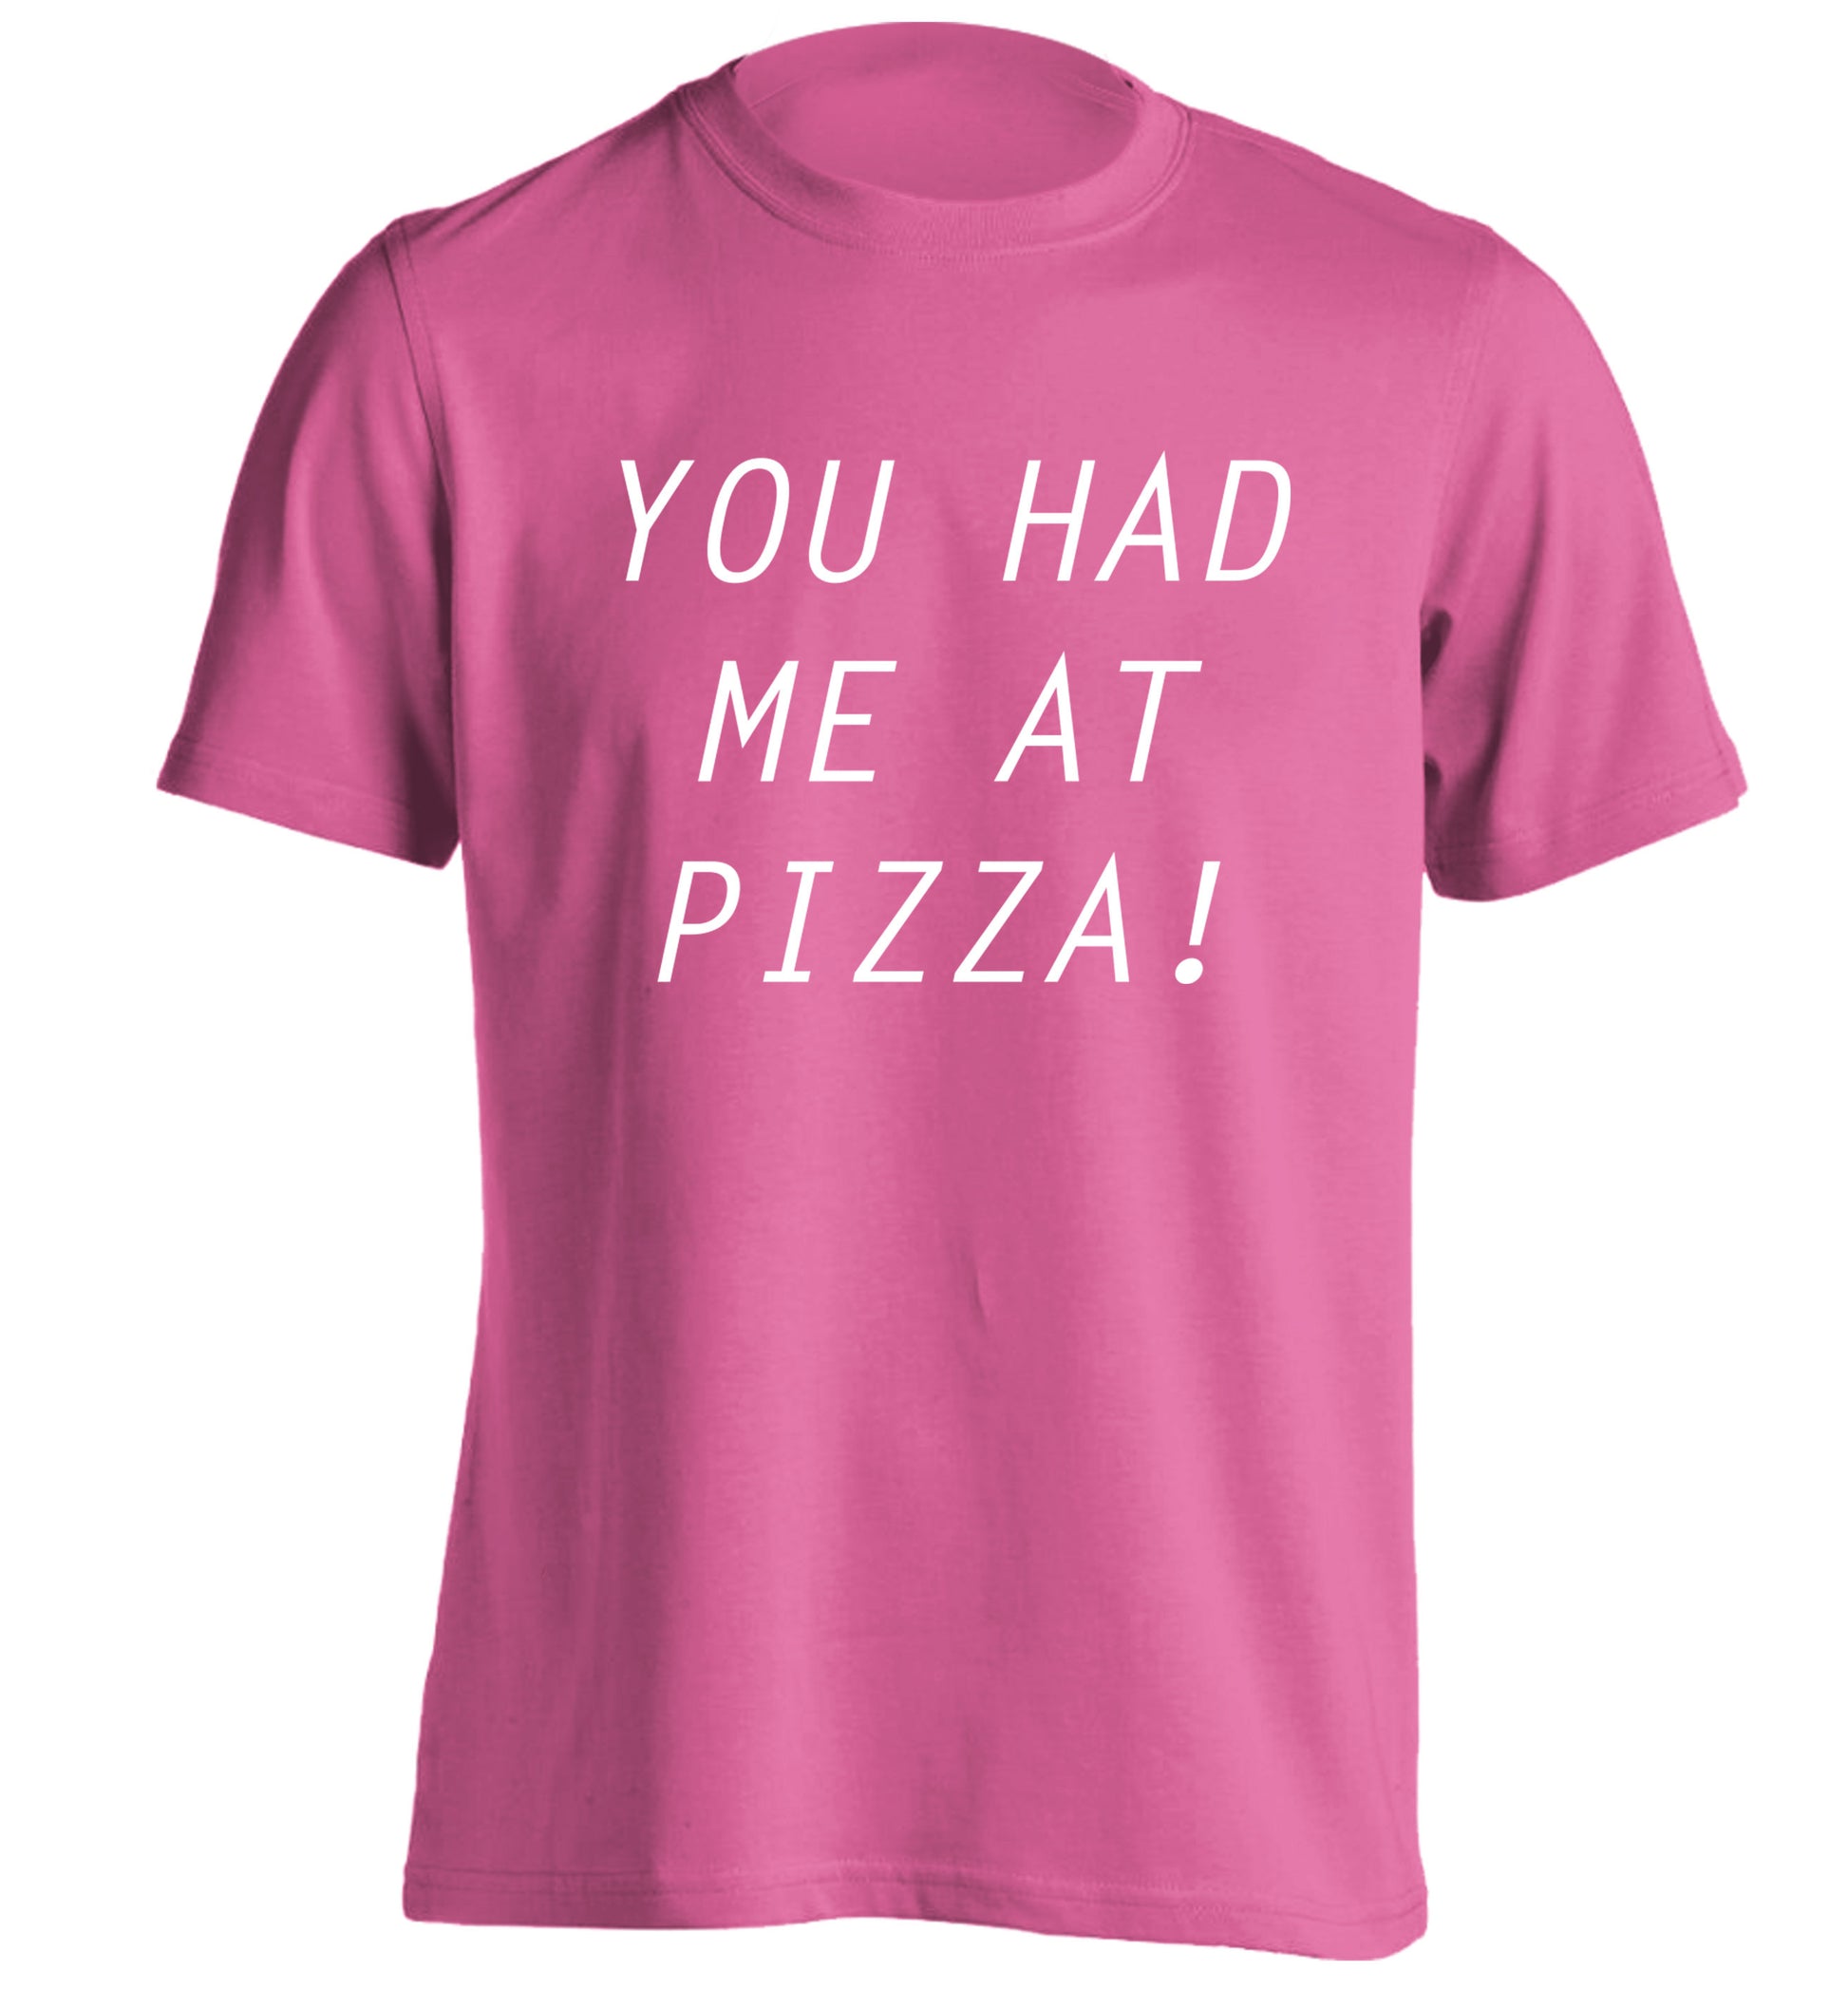 You had me at pizza adults unisex pink Tshirt 2XL